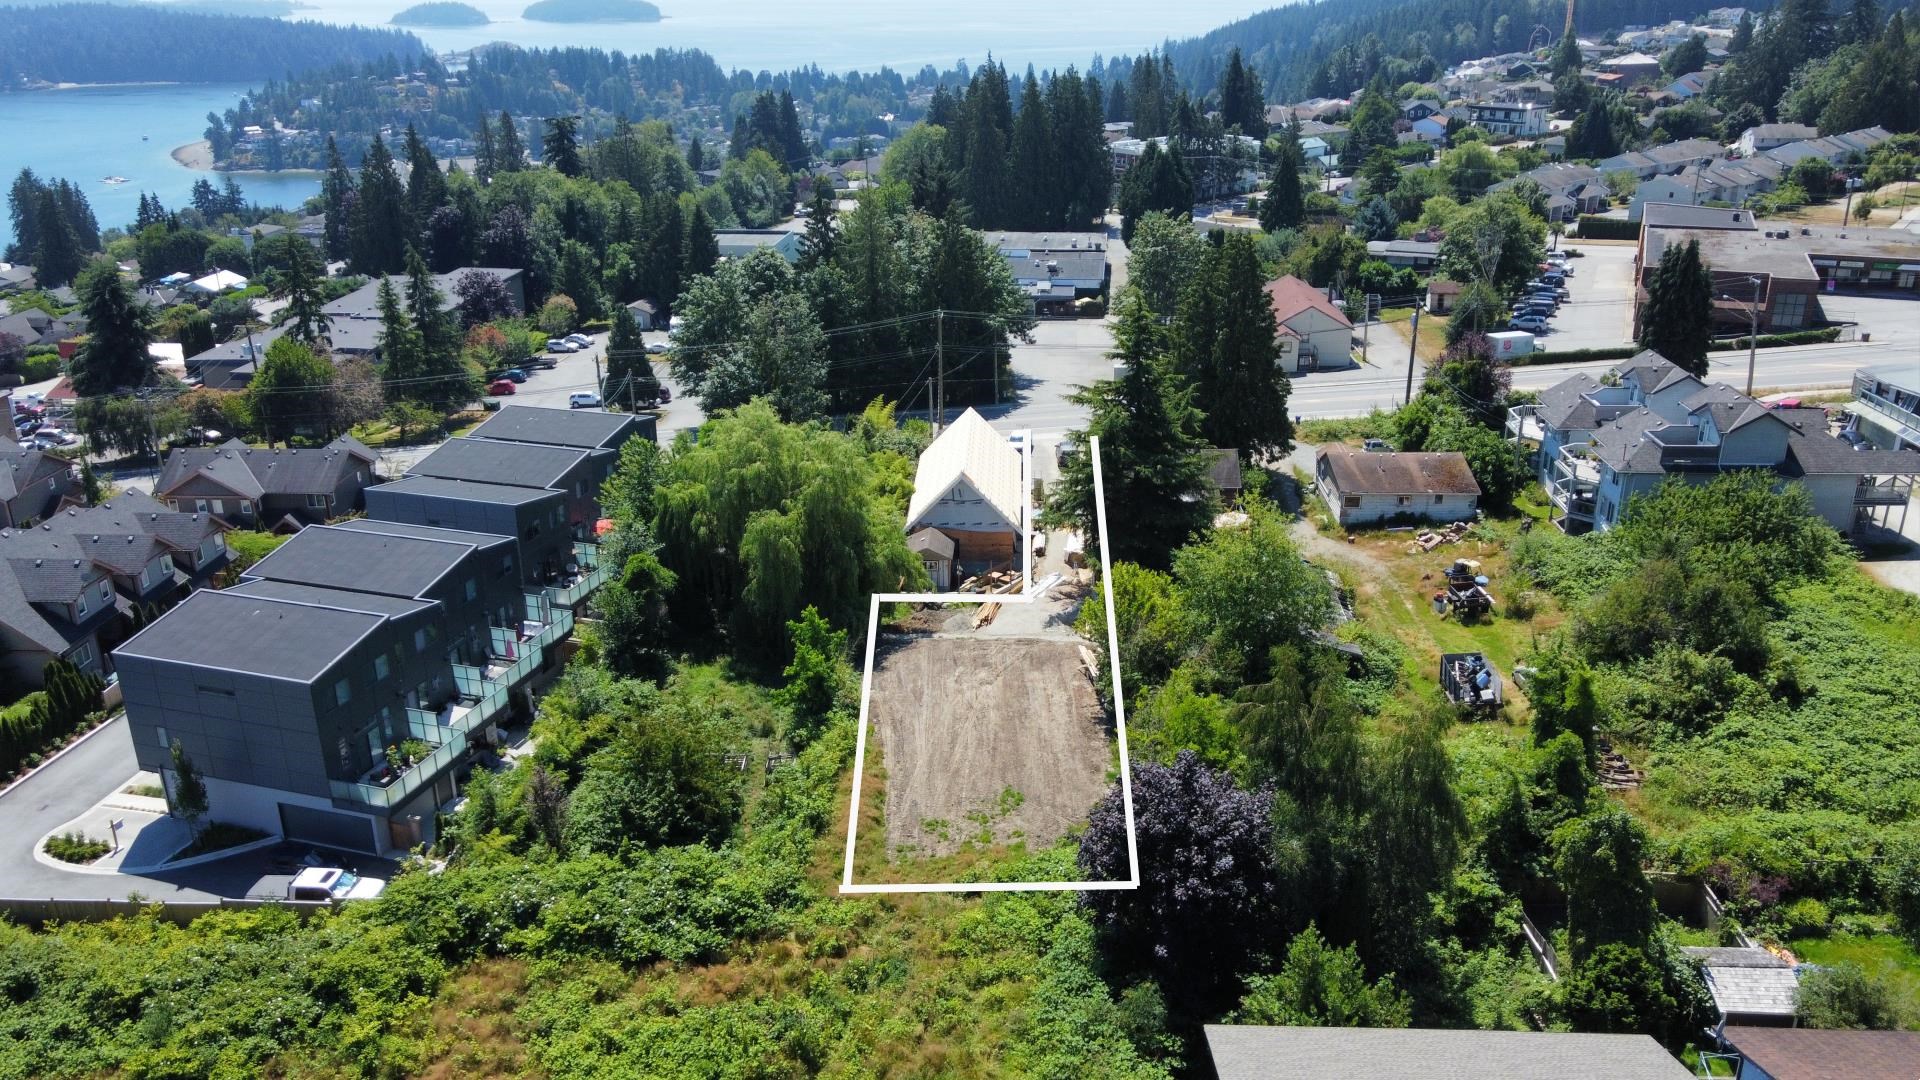 Listing image of 746 GIBSONS WAY